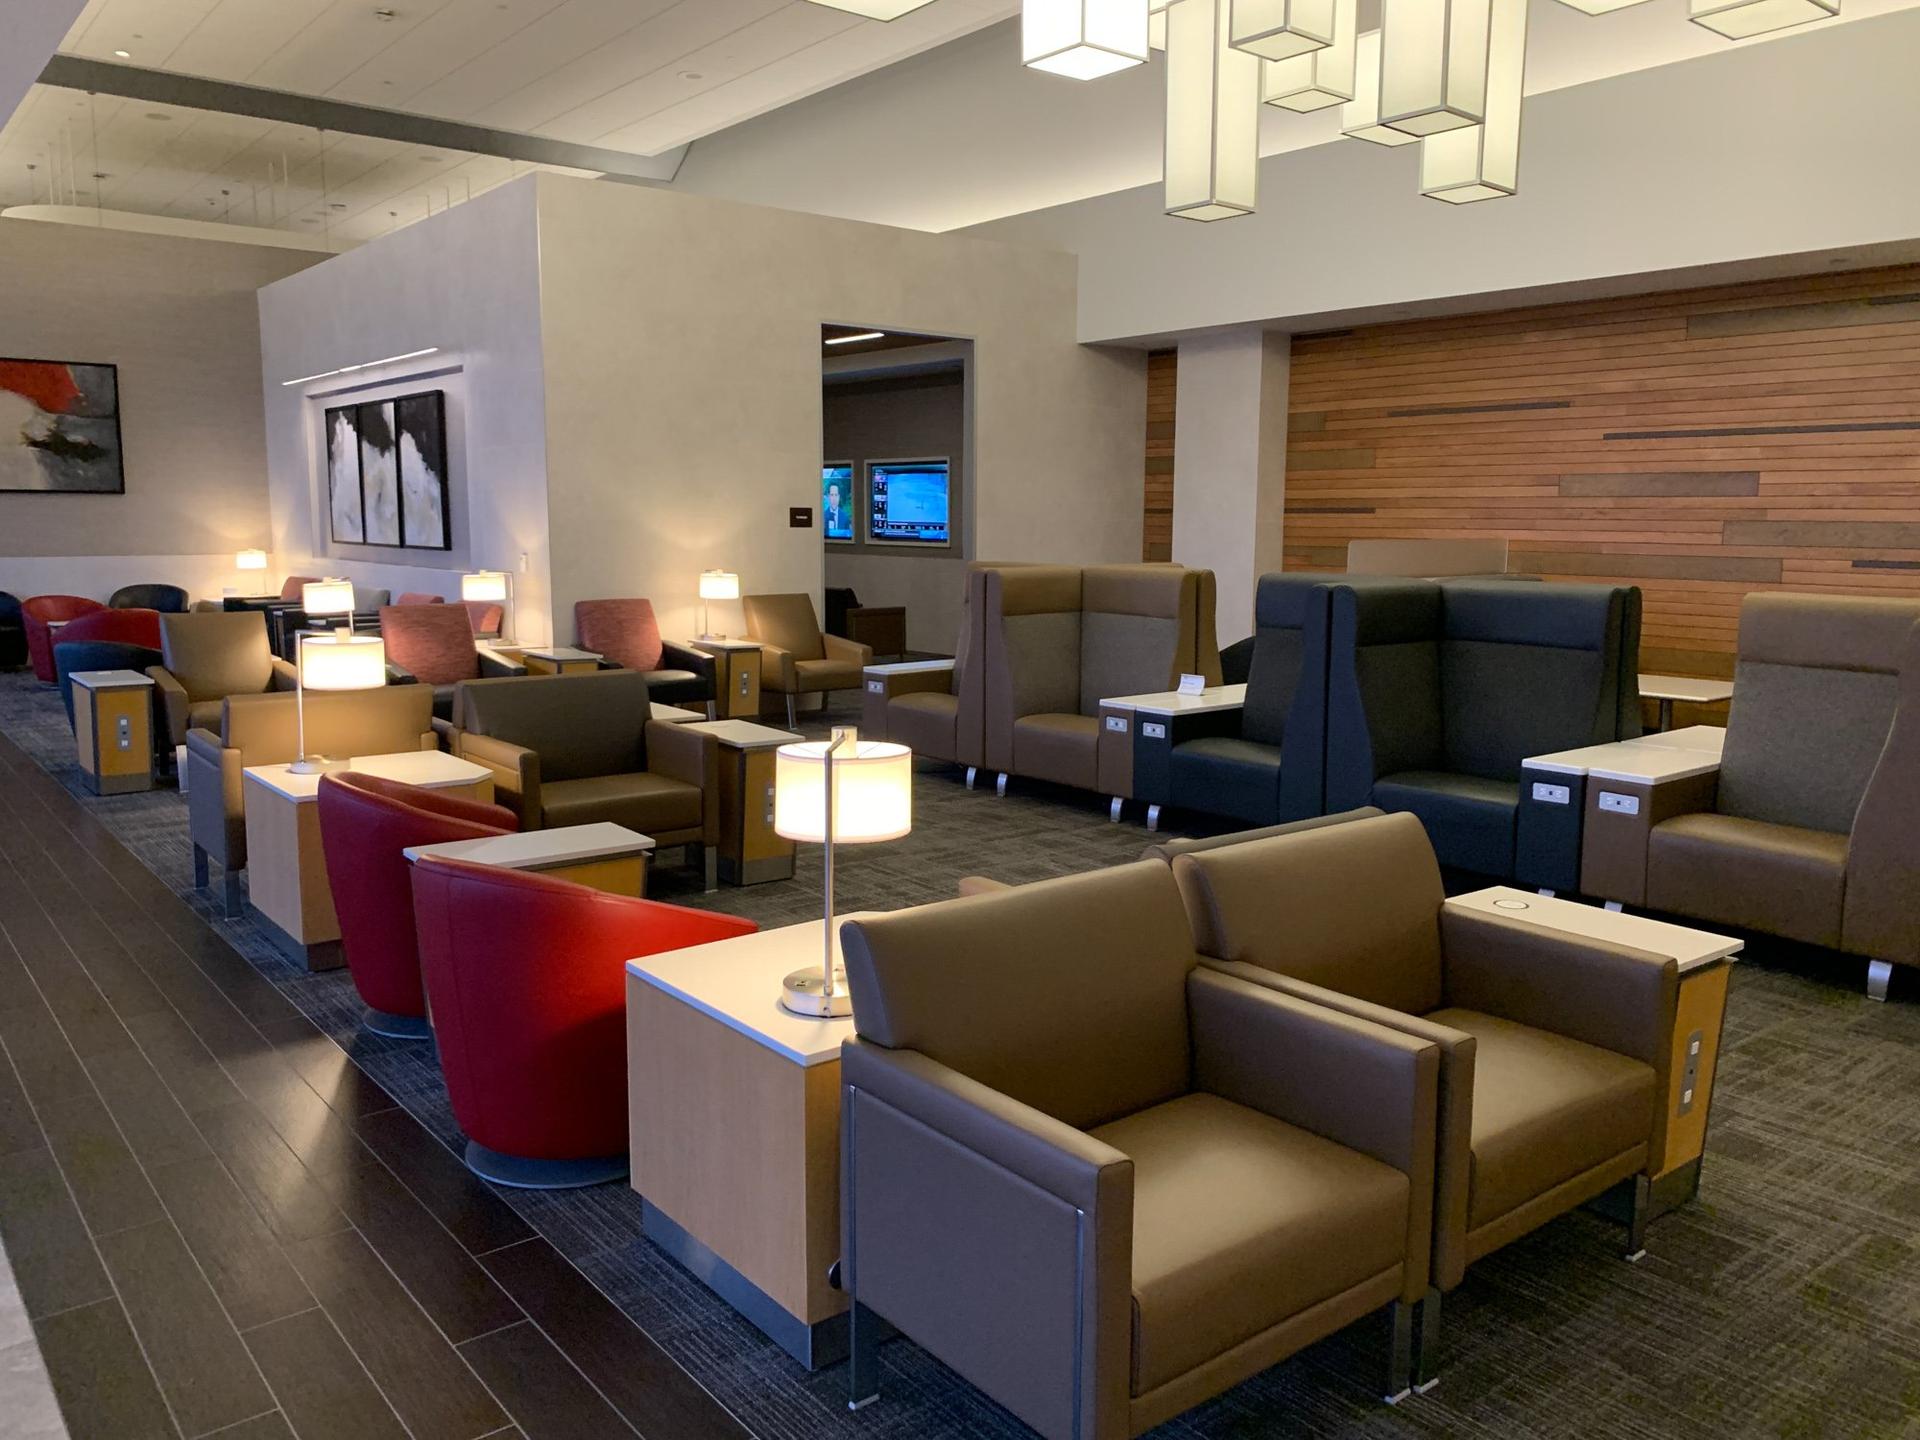 American Airlines Flagship Lounge image 37 of 55